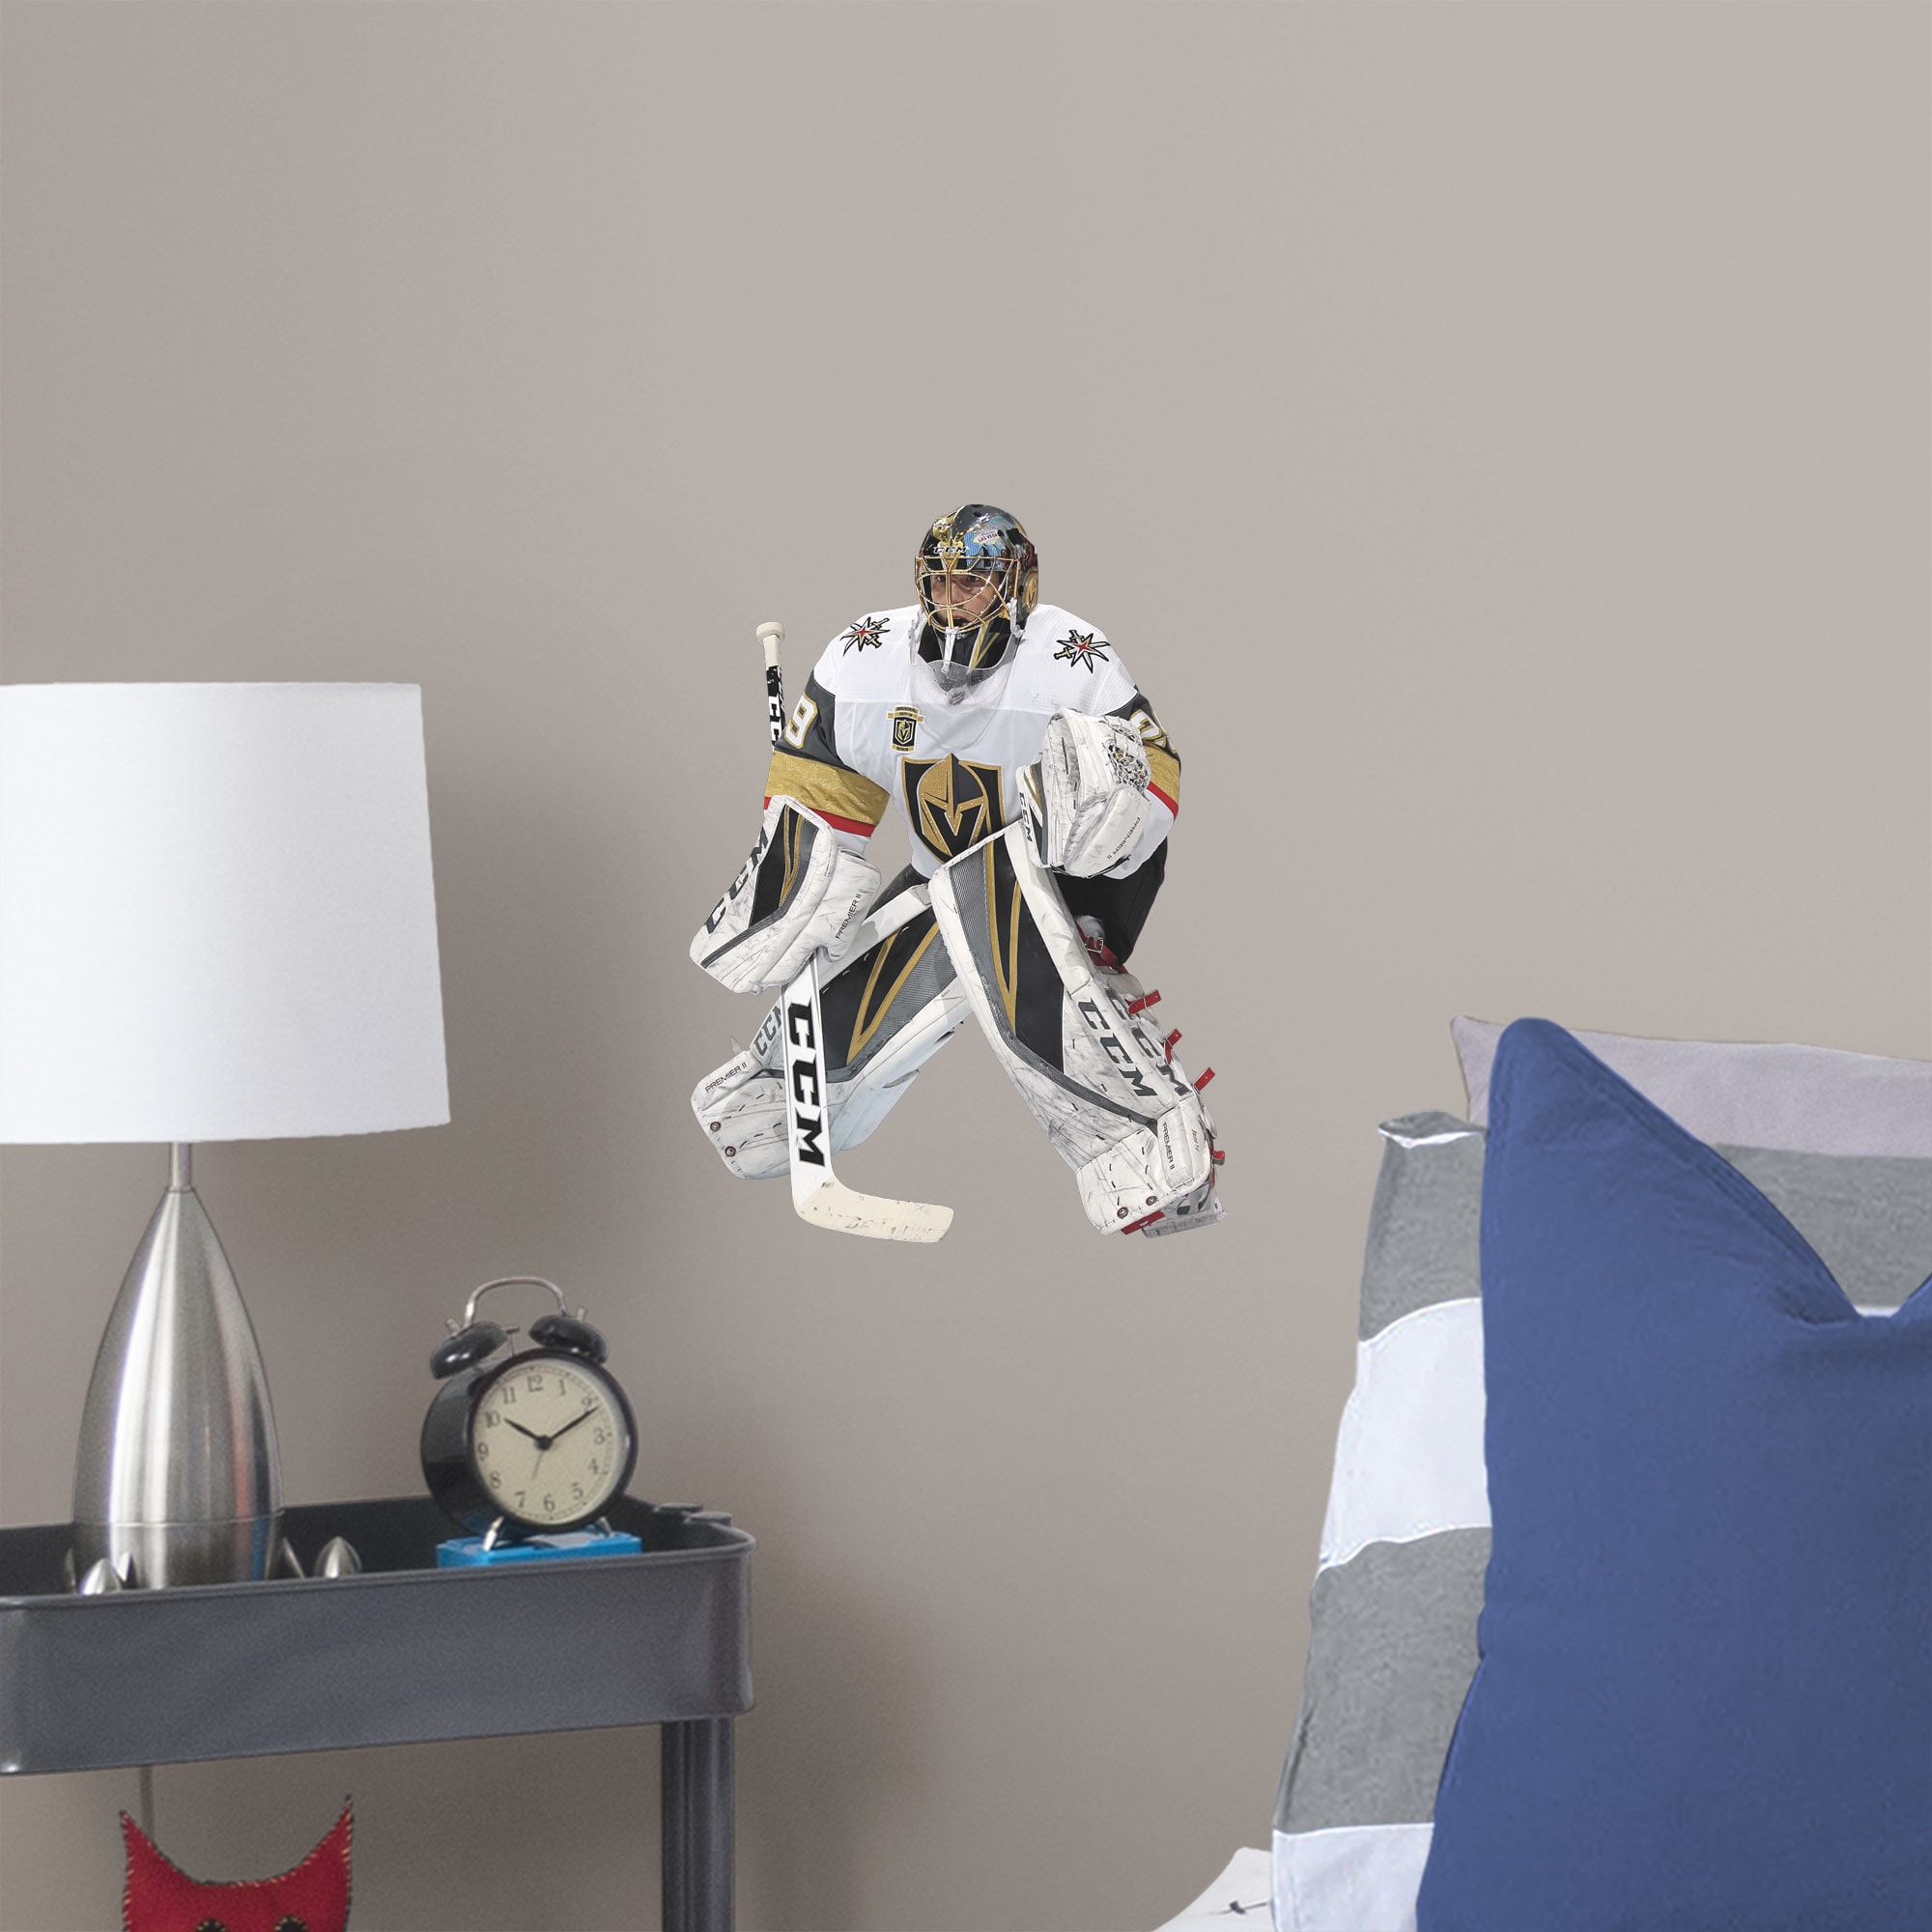 Fathead Marc-Andre Fleury - Large Officially Licensed NHL Removable Wall Decal - image 1 of 2